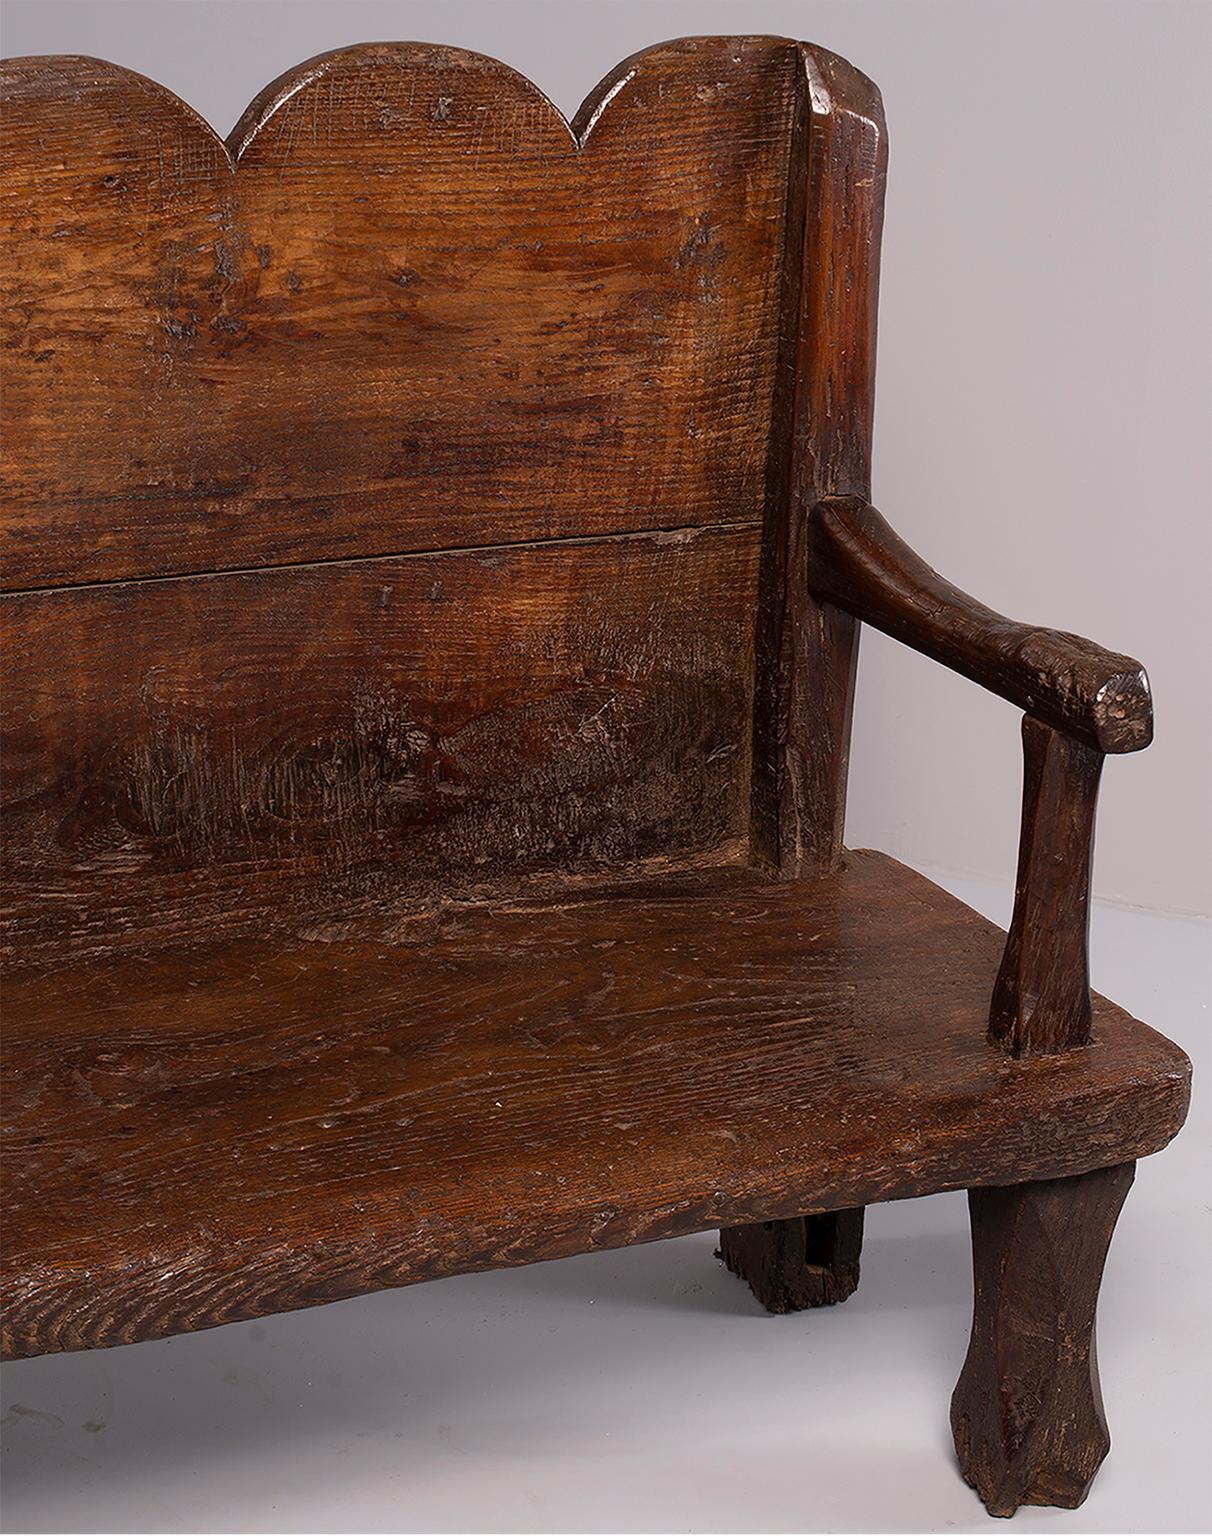 Hand-Carved 18th Century Rustic Dutch Chestnut Bench